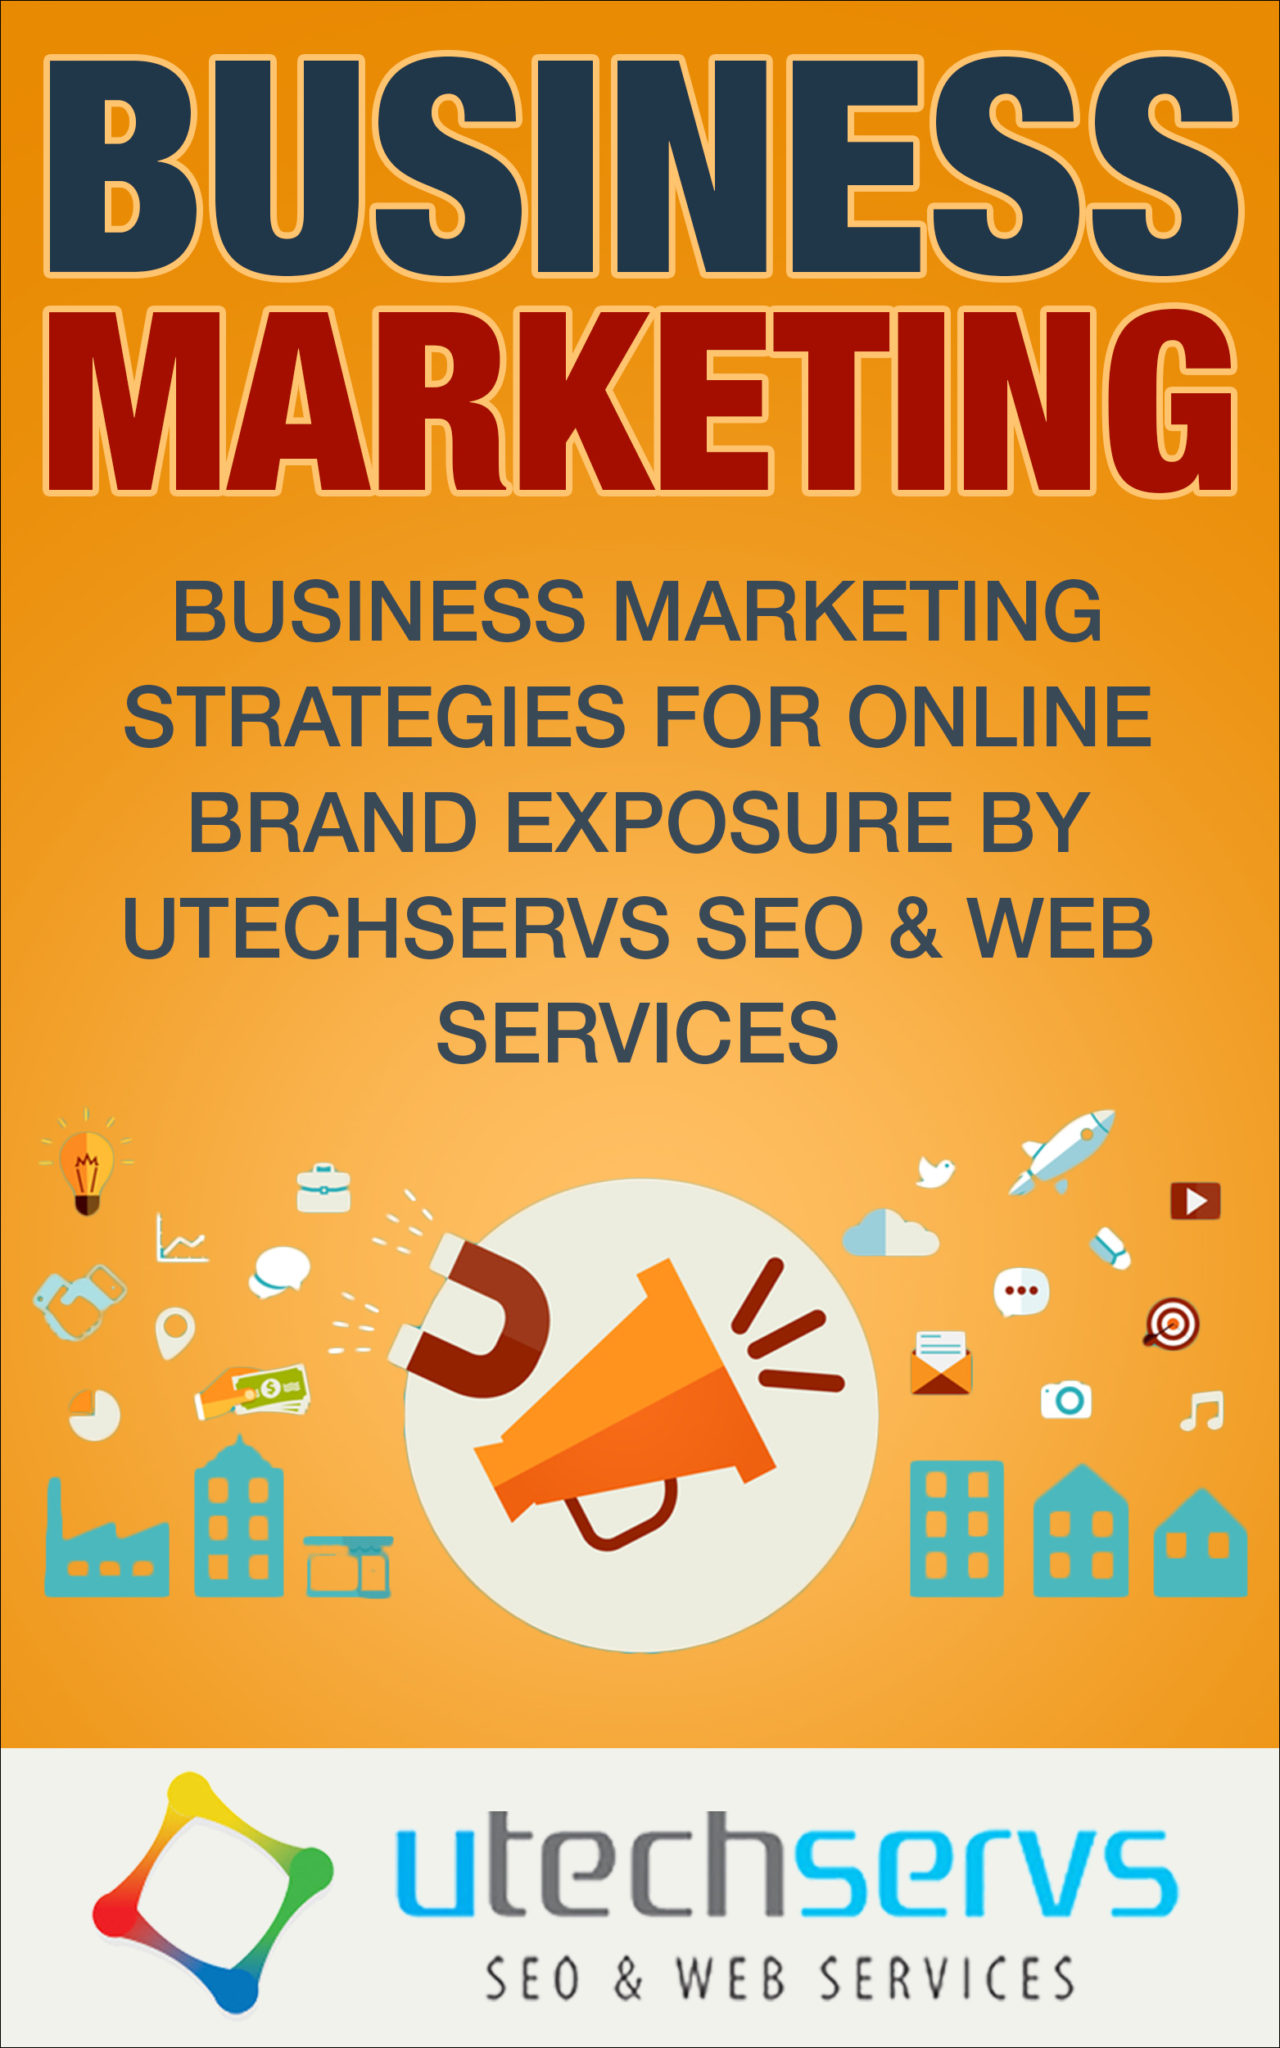 FREE: Business Marketing: Business Marketing Strategies For Online Brand Exposure by Utechservs Web Services